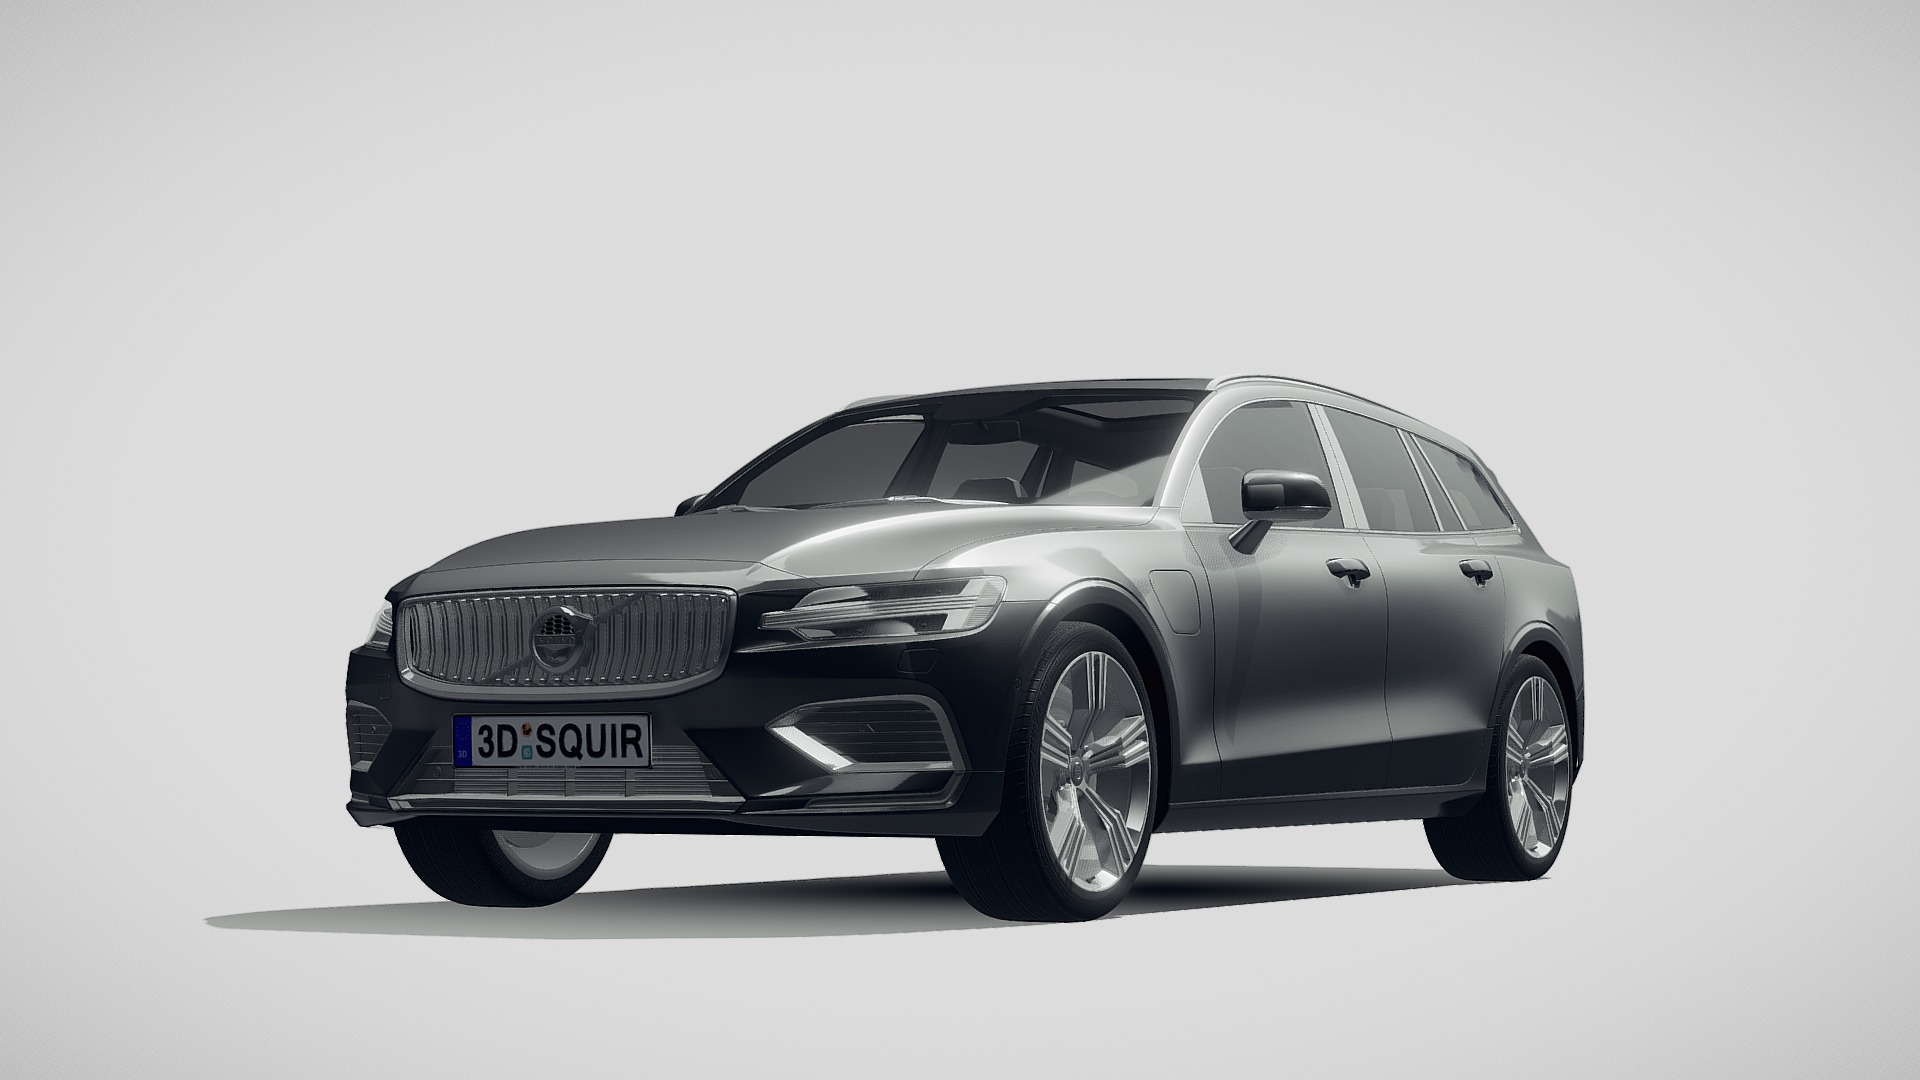 3D model Volvo V60 2019 - This is a 3D model of the Volvo V60 2019. The 3D model is about a black car with a white background.